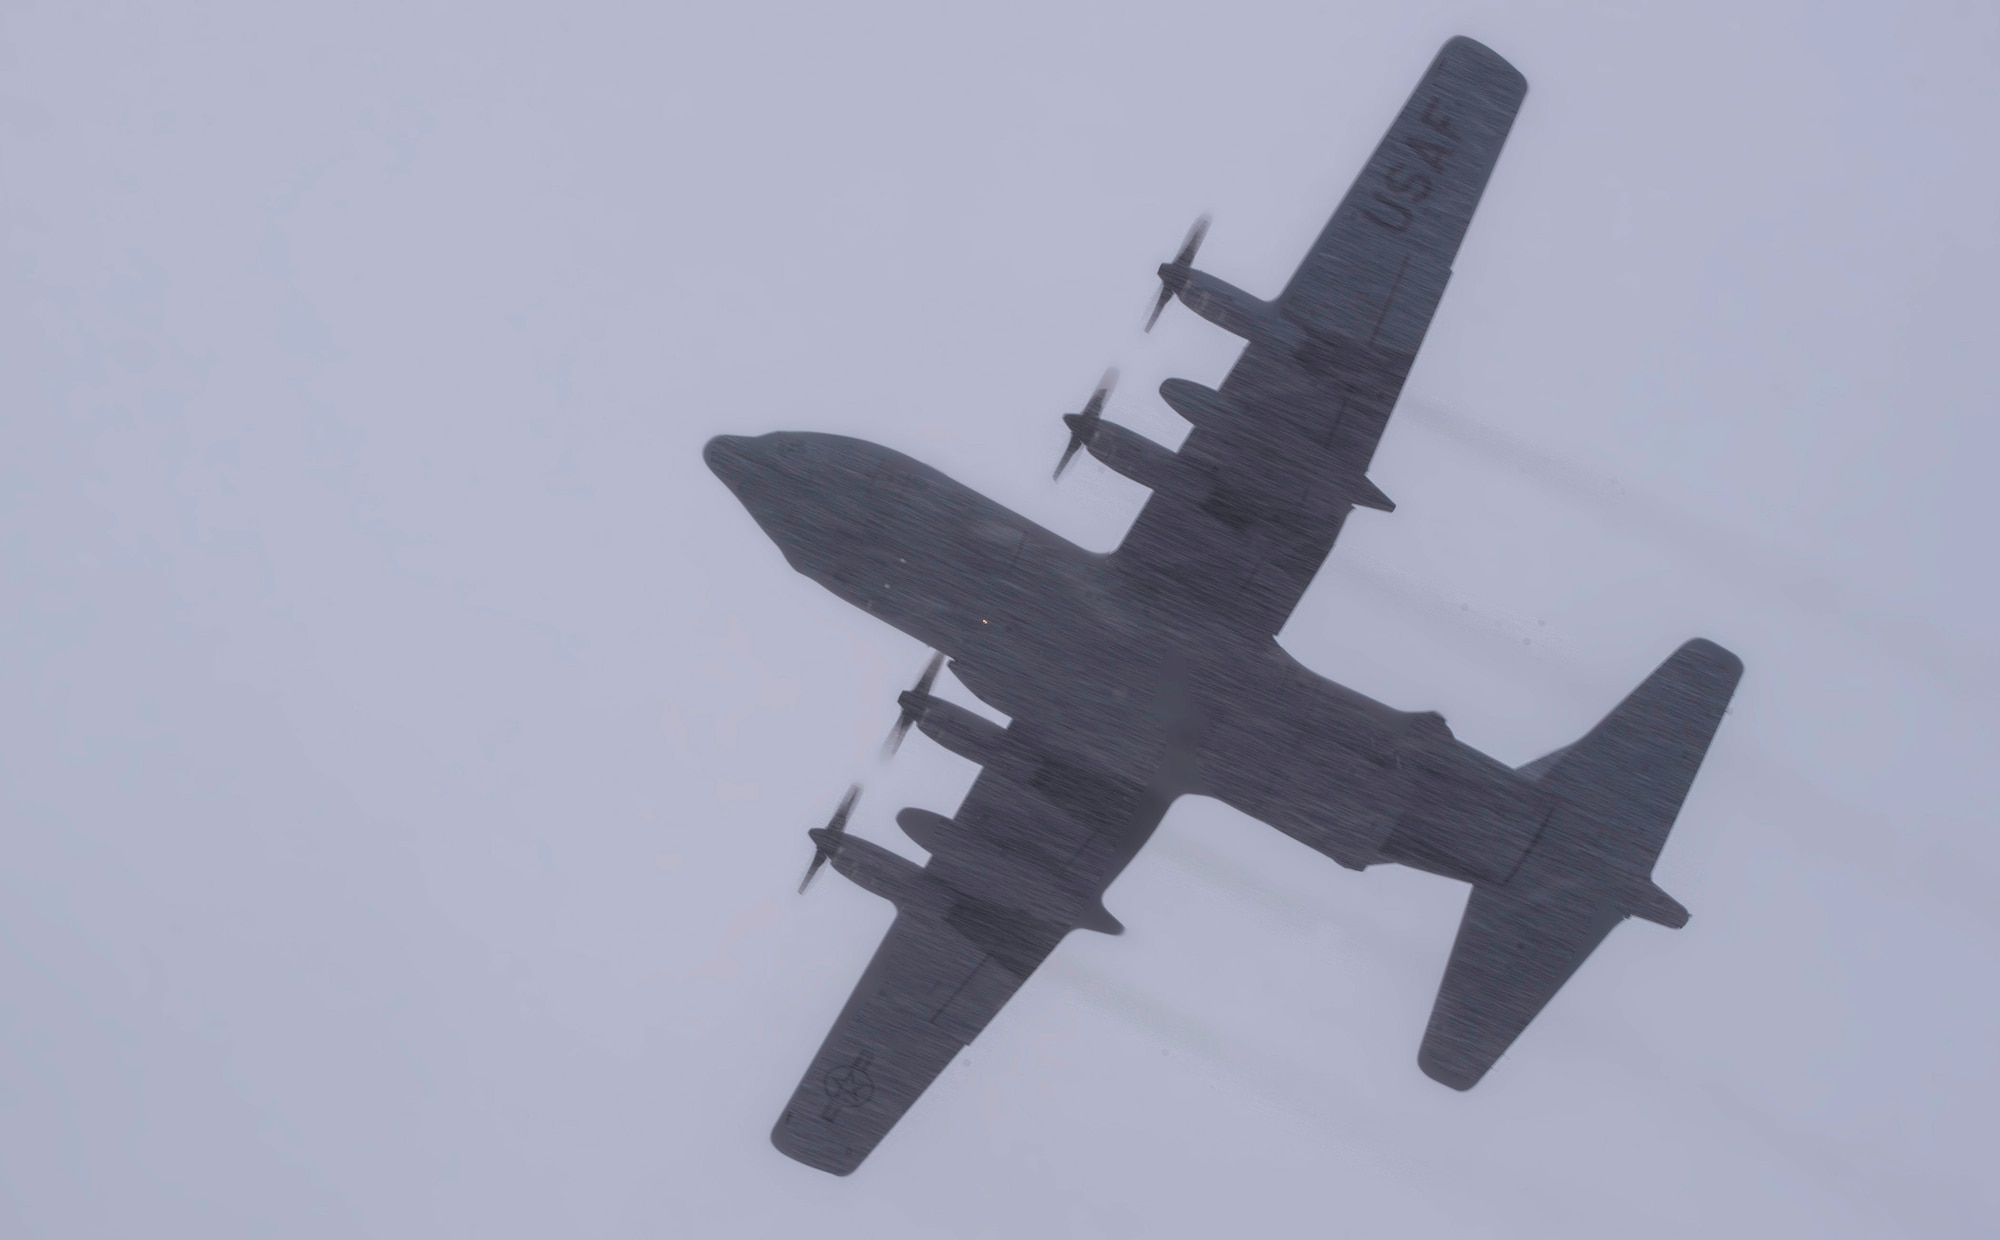 A C-130 Hercules assigned to the 36th Airlift Squadron, Yokota Air Base, Japan, flies over Draughon Range near Misawa Air Base, Japan, Jan. 31, 2017. Airmen from Yokota Air Base visited Misawa to practice their instrument meteorological condition skills, which are used when low or poor weather conditions exist. (U.S. Air Force photo by Tech. Sgt. Araceli Alarcon)